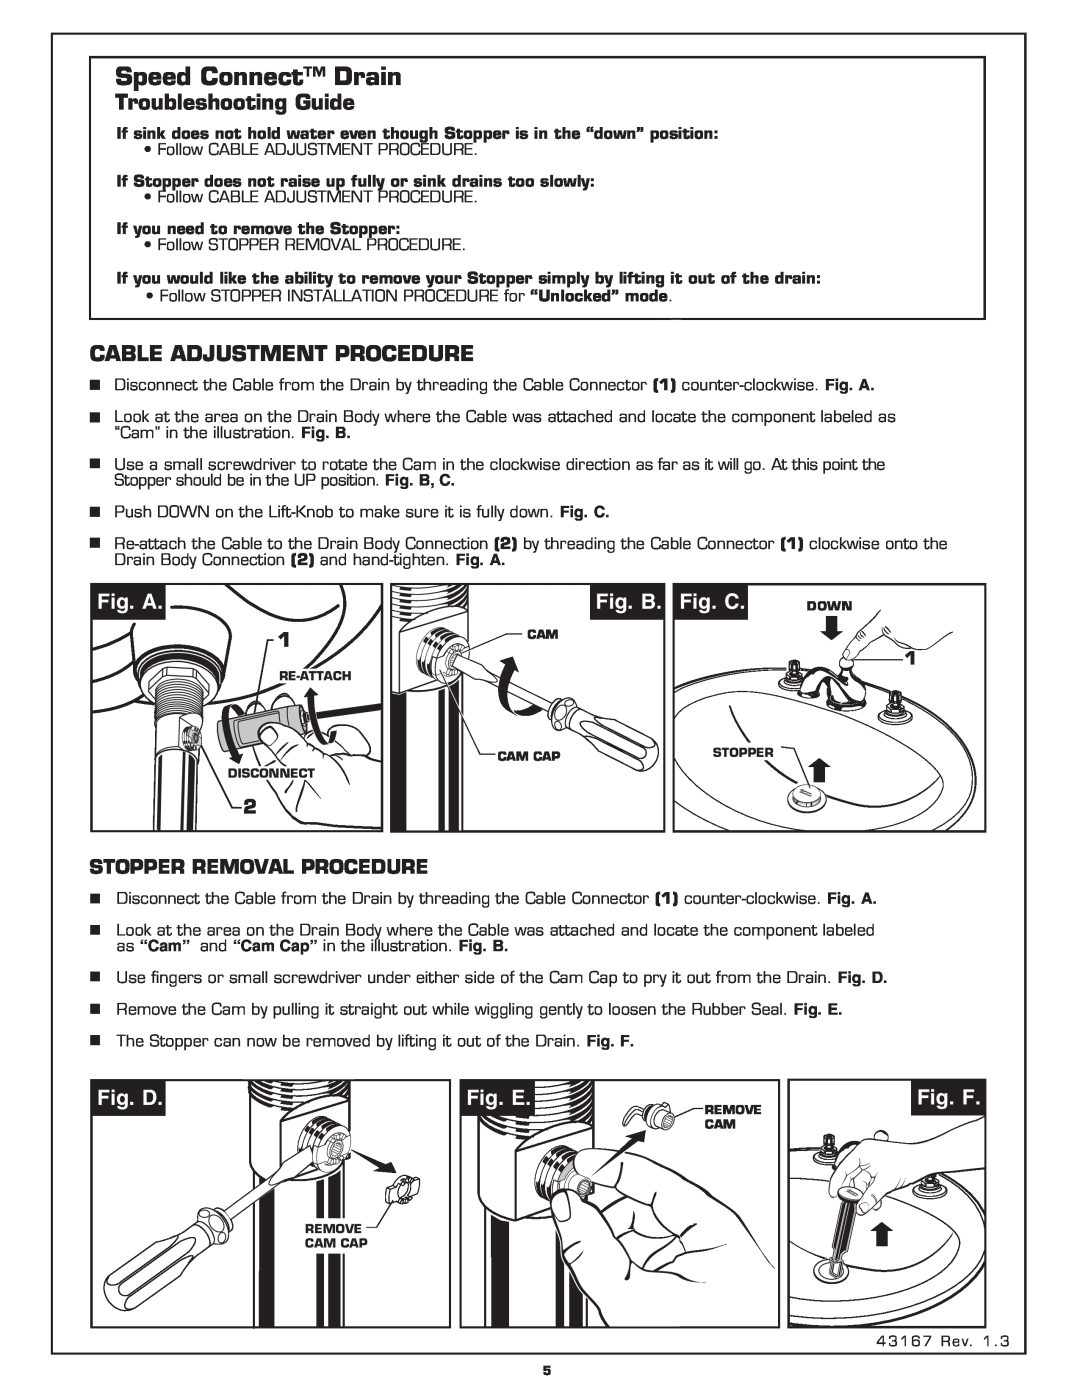 American Standard 3801.000 Troubleshooting Guide, Cable Adjustment Procedure, Fig. A, Fig. B. Fig. C, Fig. D, Fig. E 